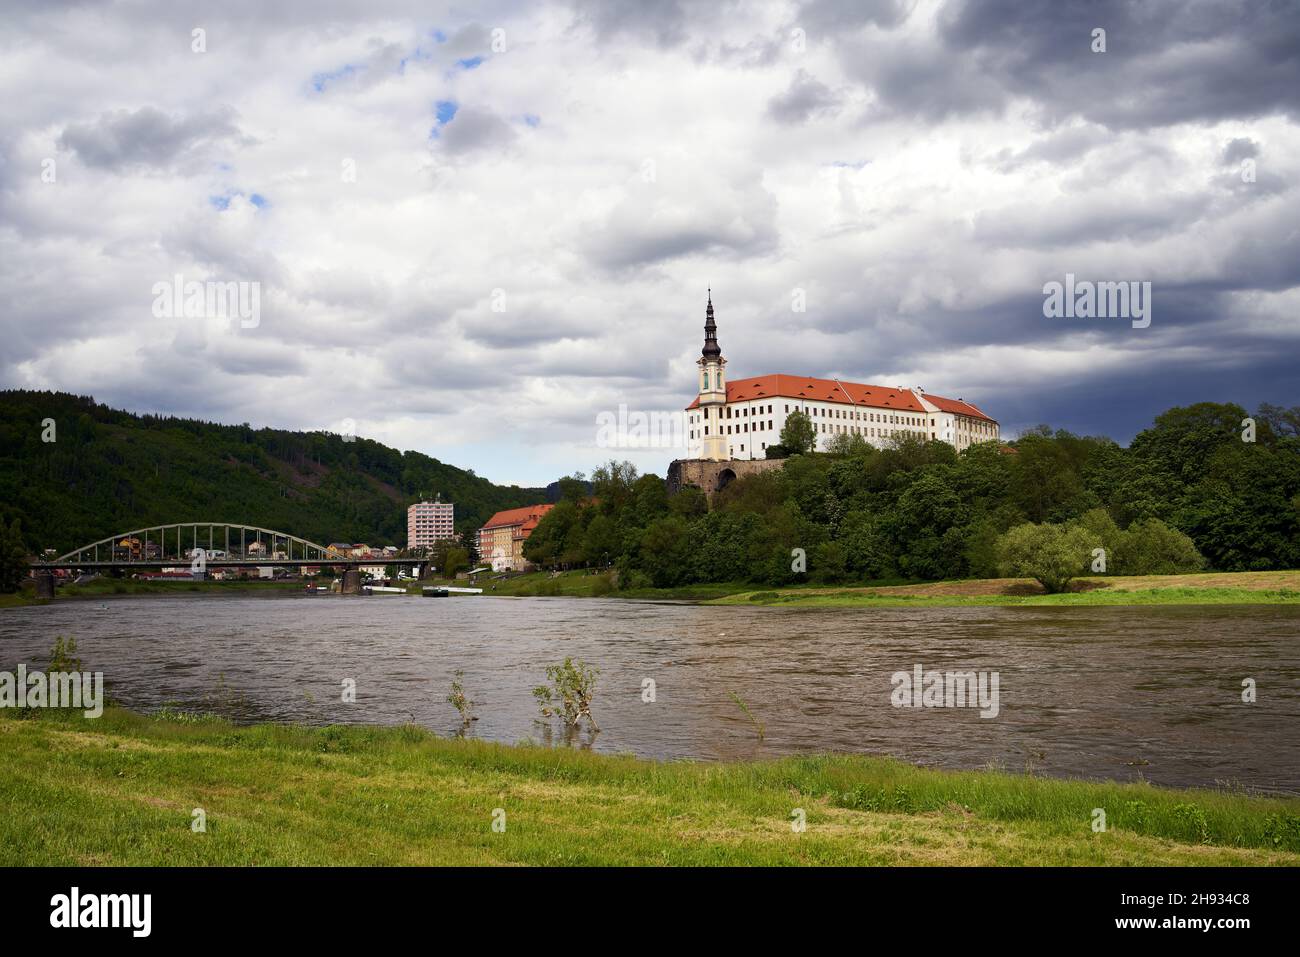 DECIN, CZECH REPUBLIC - MAY 22, 2021: Castle and the Elbe river Stock Photo